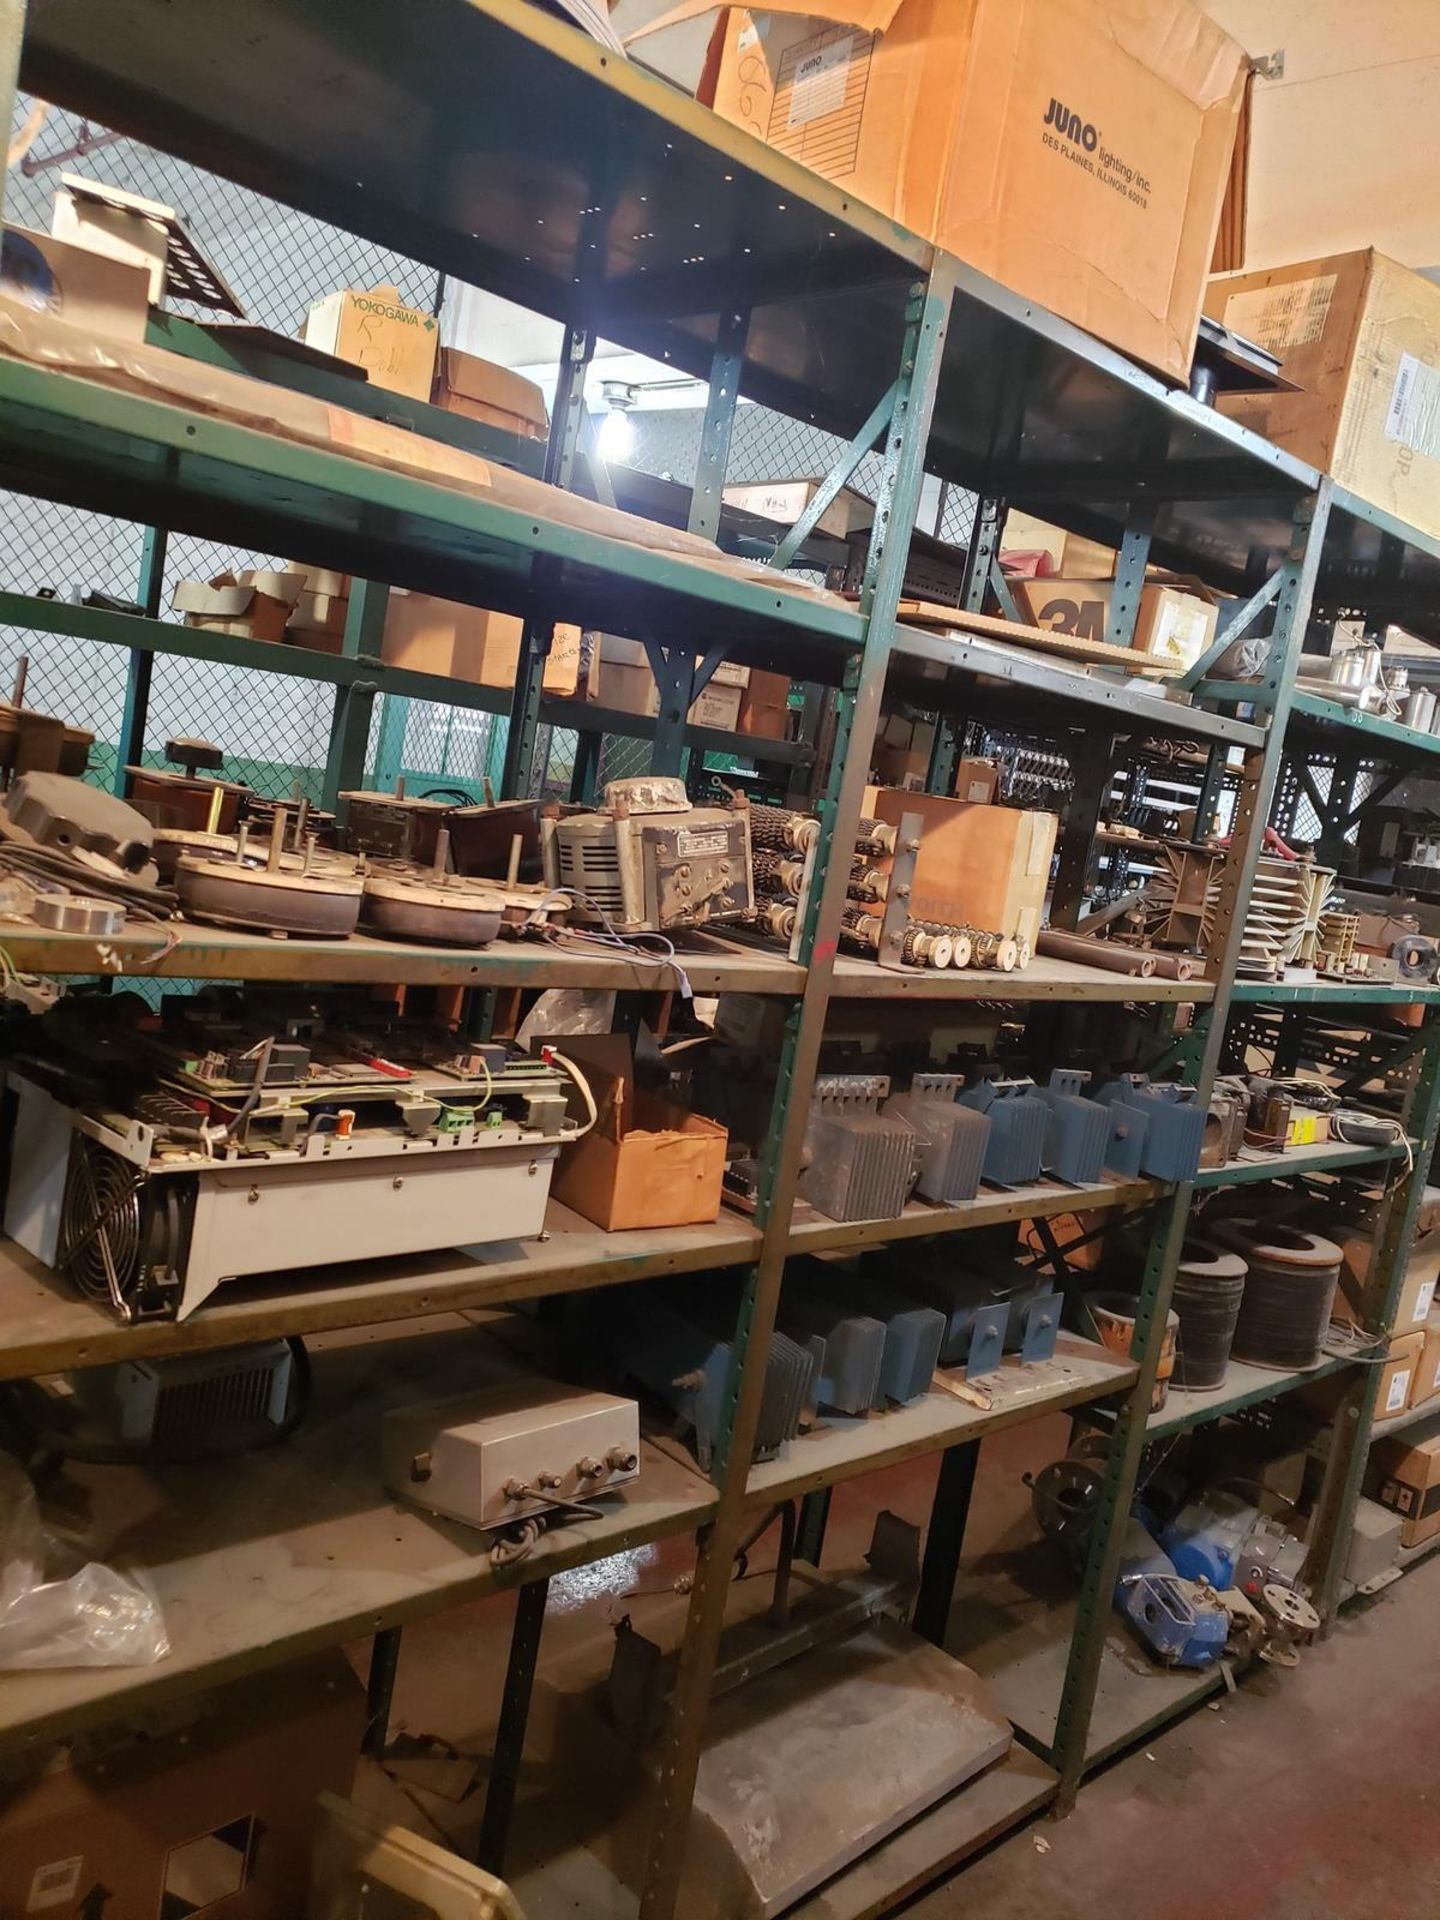 Contents of Spare Parts Storage Cage | Rig Fee $7500 - Image 11 of 20